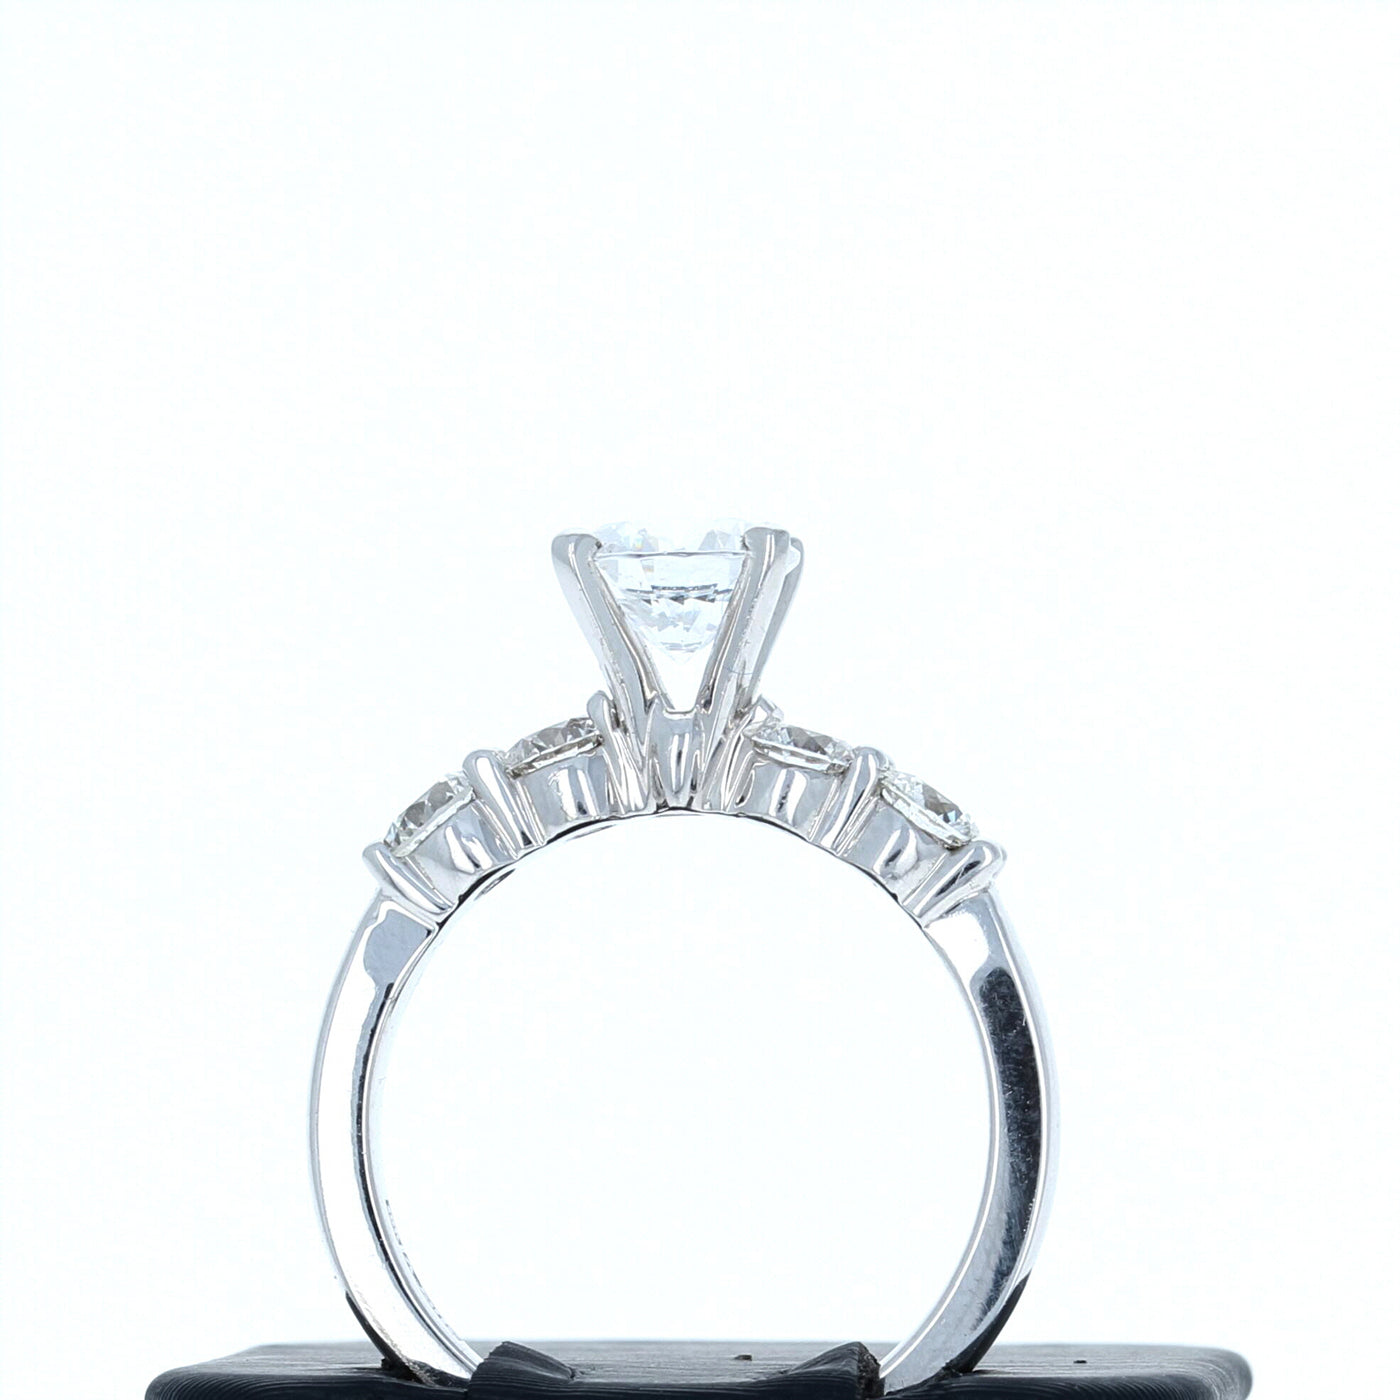 Apparel & Accessories > Jewelry > Rings A Jaffe Diamond Engagement Ring in White Gold ME1083/80 Pierce Custom Jewelers